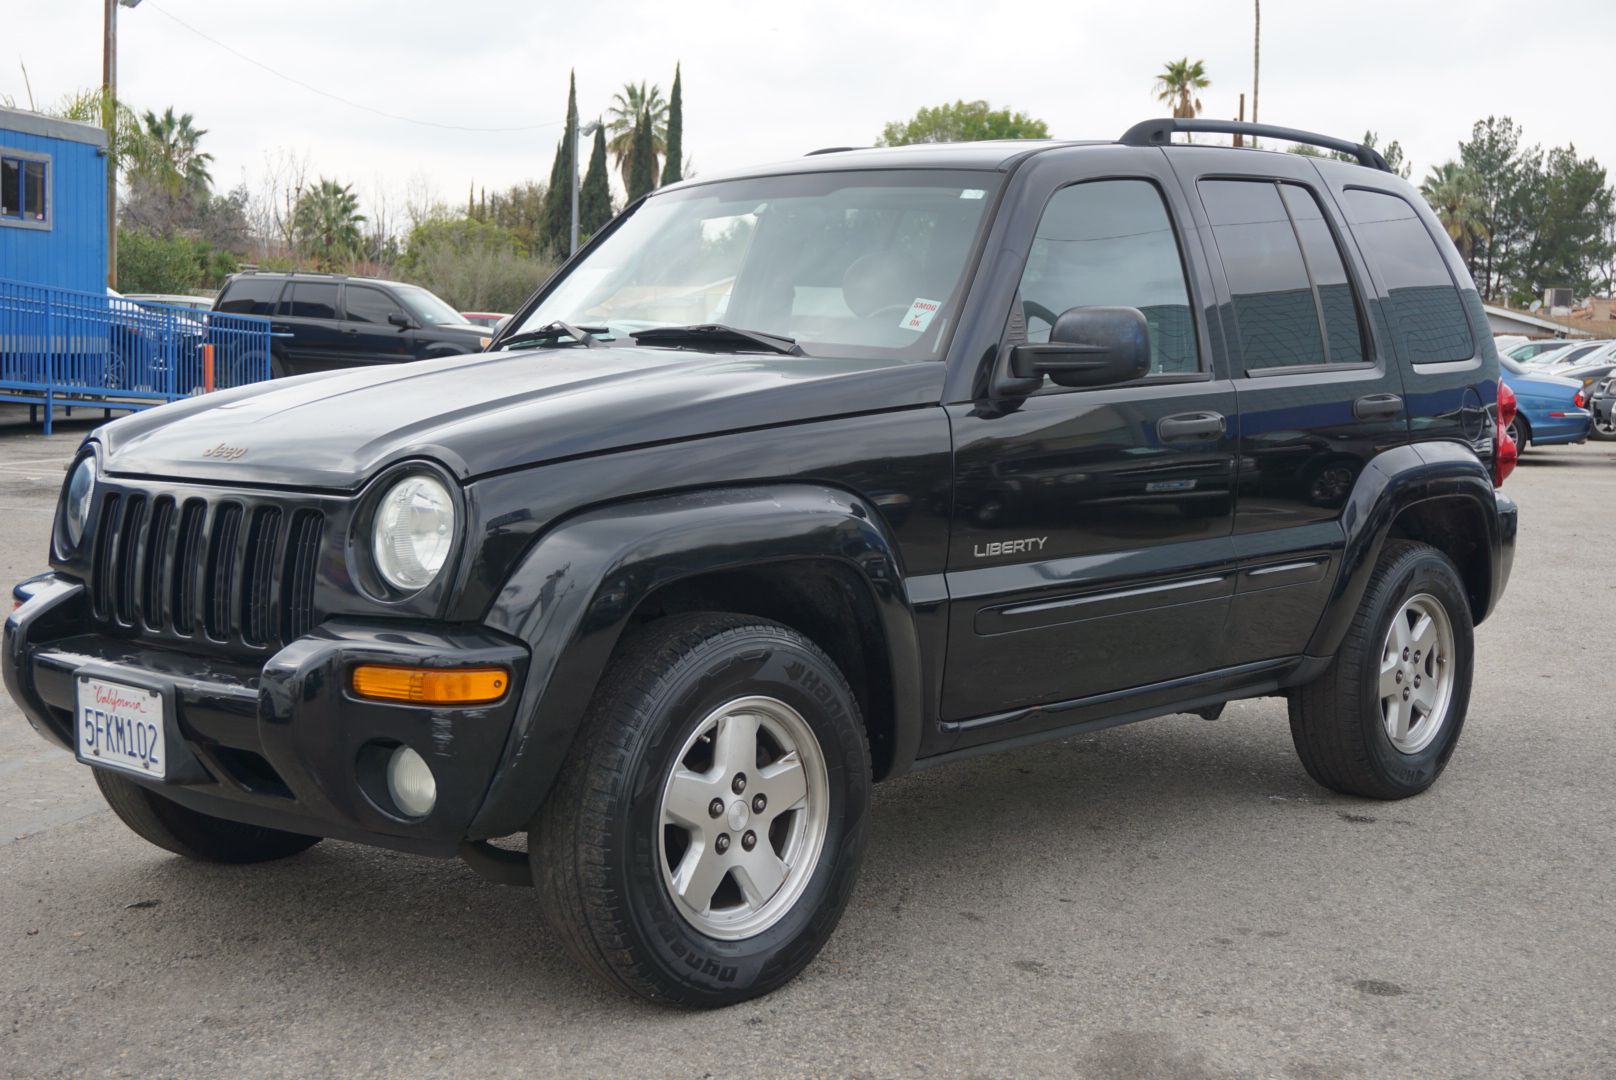 Used 2004 Jeep Liberty Limited at City Cars Warehouse INC